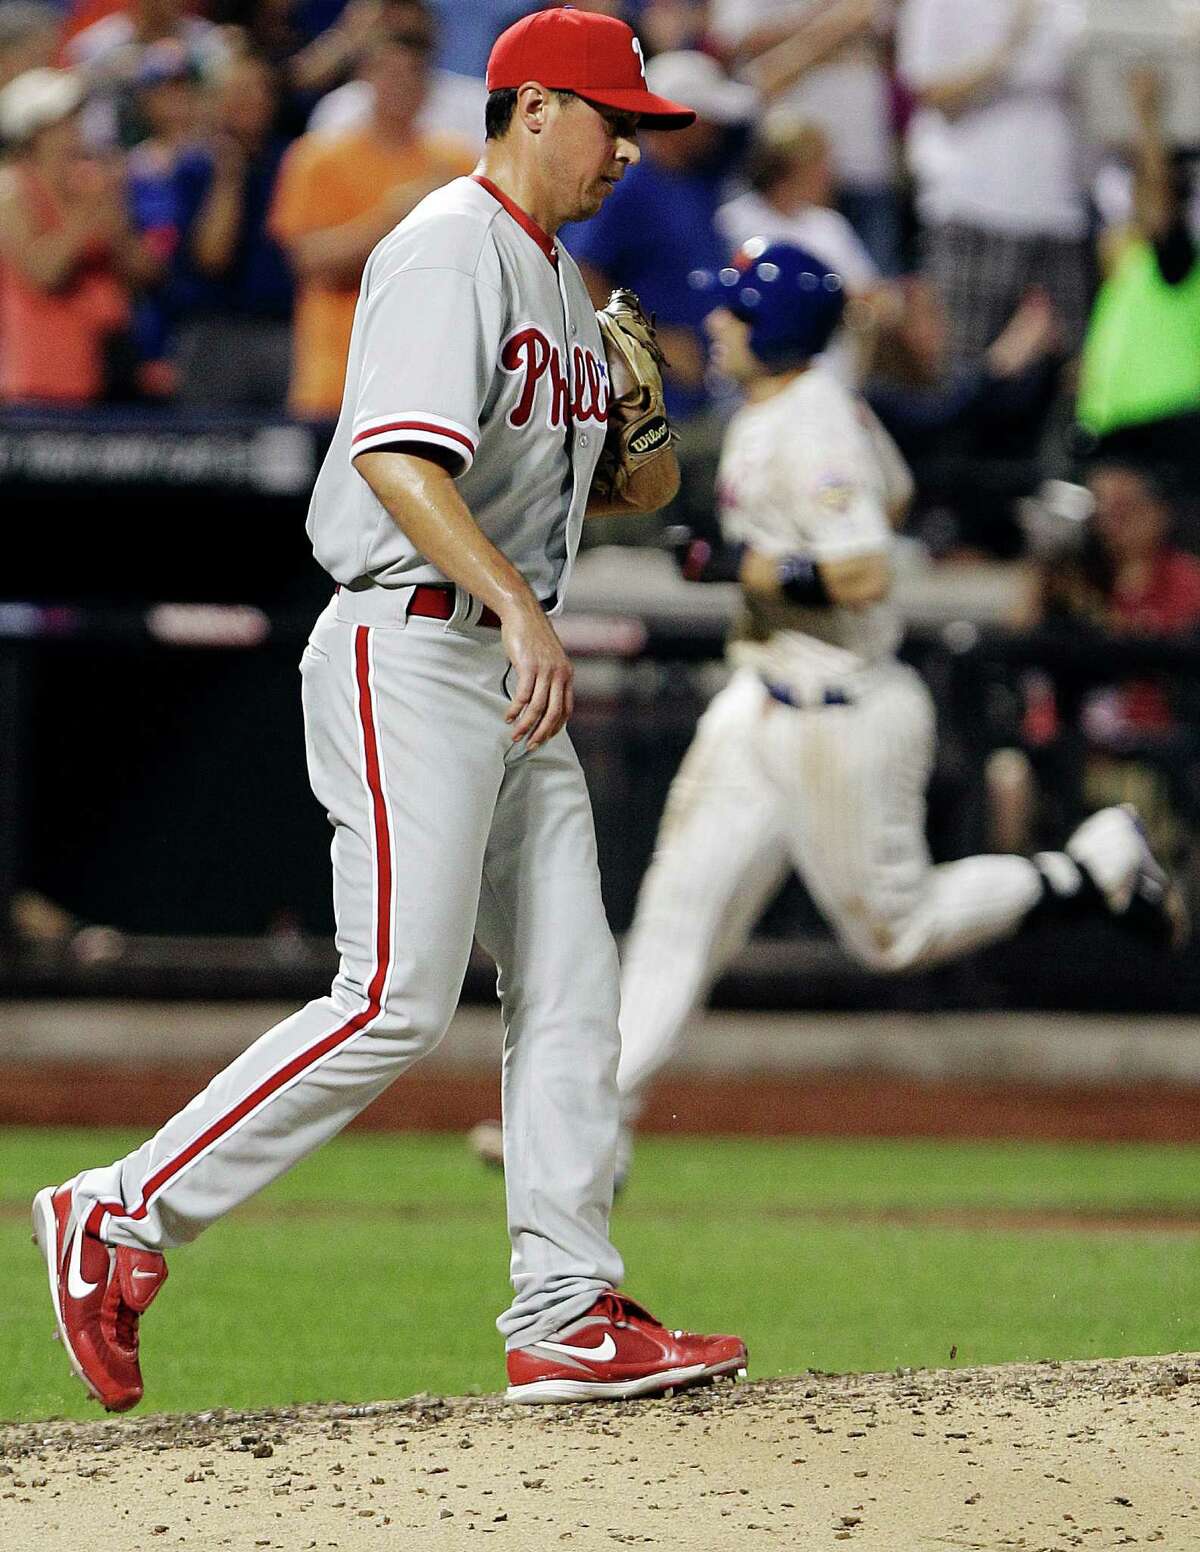 Philadelphia Phillies relief pitcher Brian Sanches reacts as New York Mets' David Wright head to home plate after hitting a three-run home run during the sixth inning of a baseball game, Tuesday, July 3, 2012, in New York. (AP Photo/Frank Franklin II)